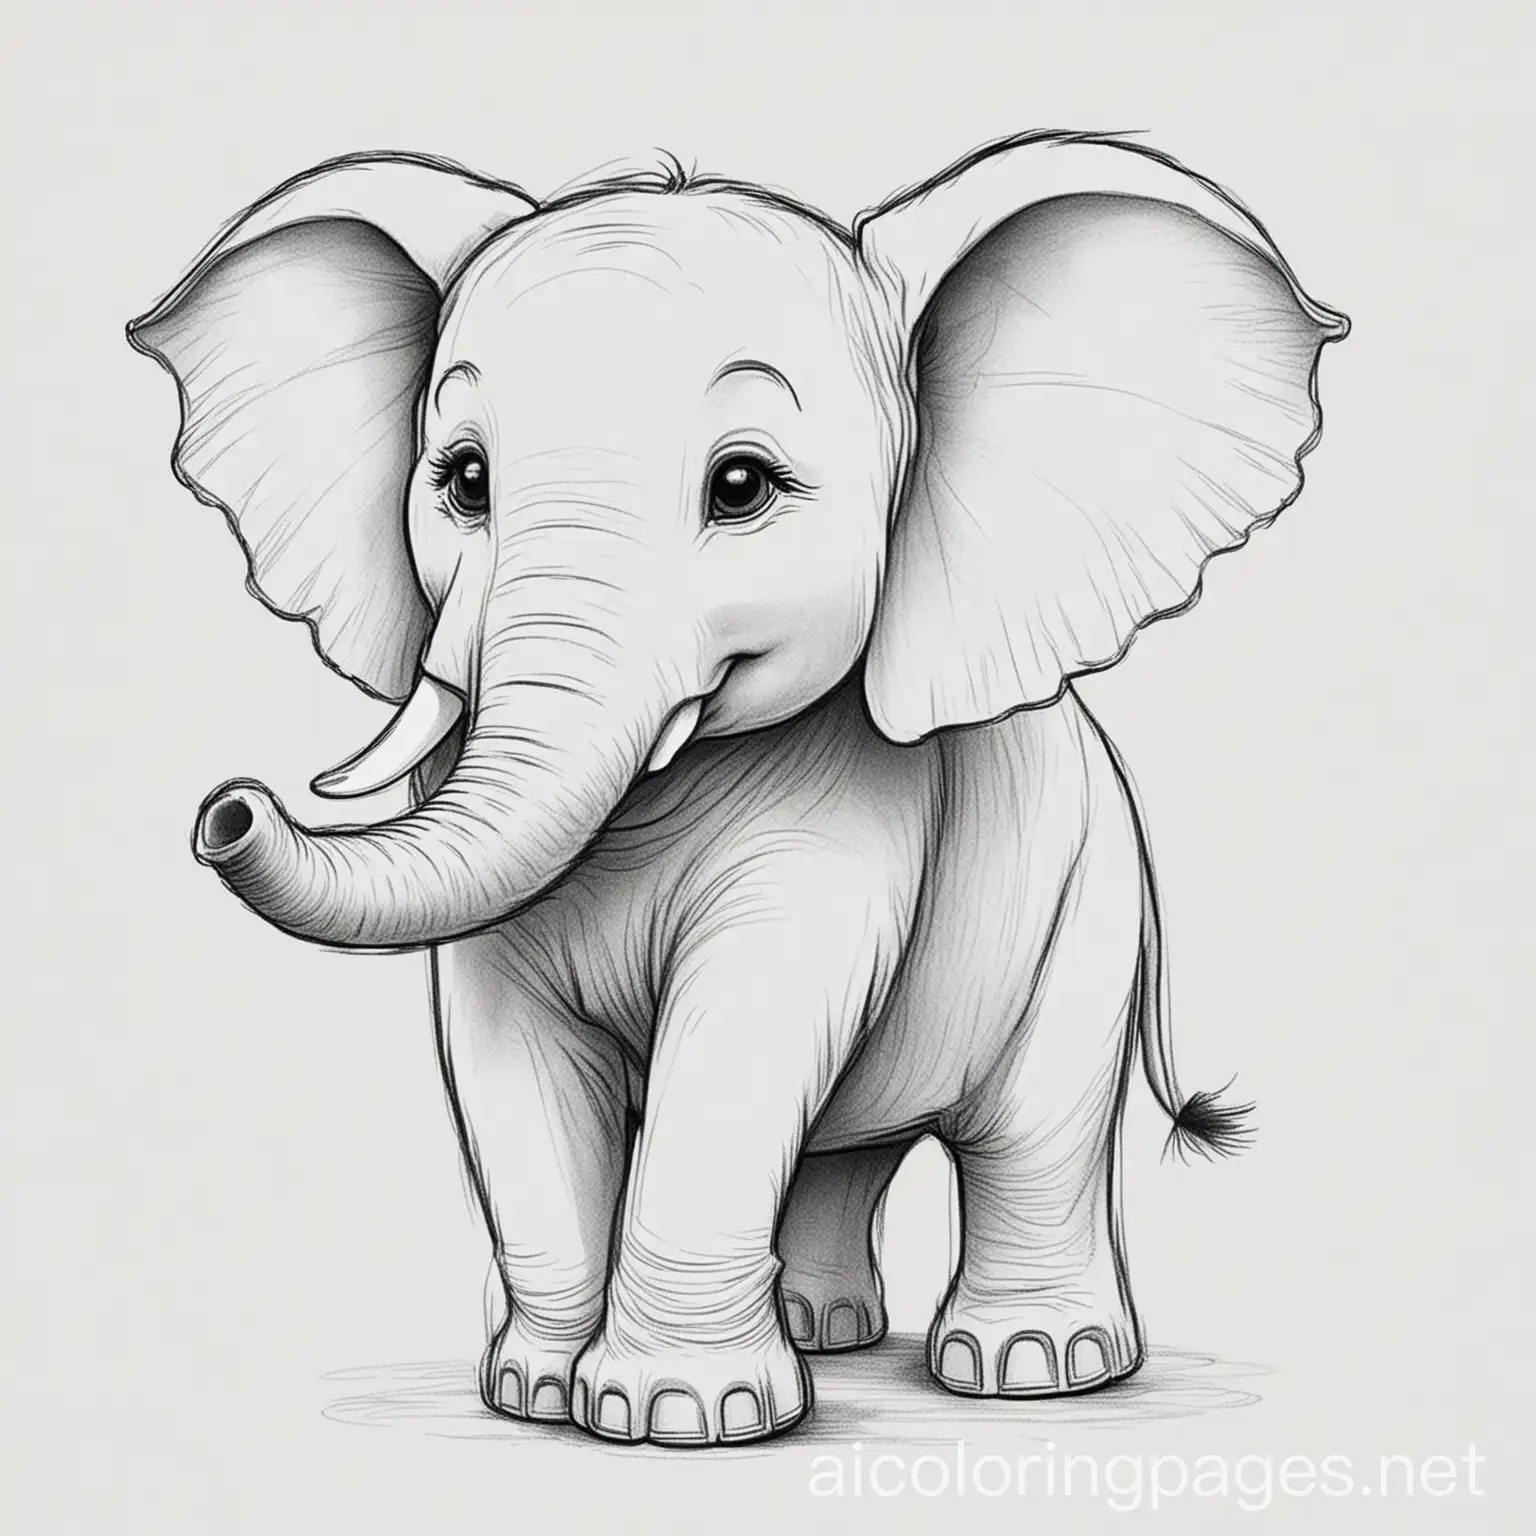 Happy-Elephant-Playing-Coloring-Page-in-Line-Art-Style